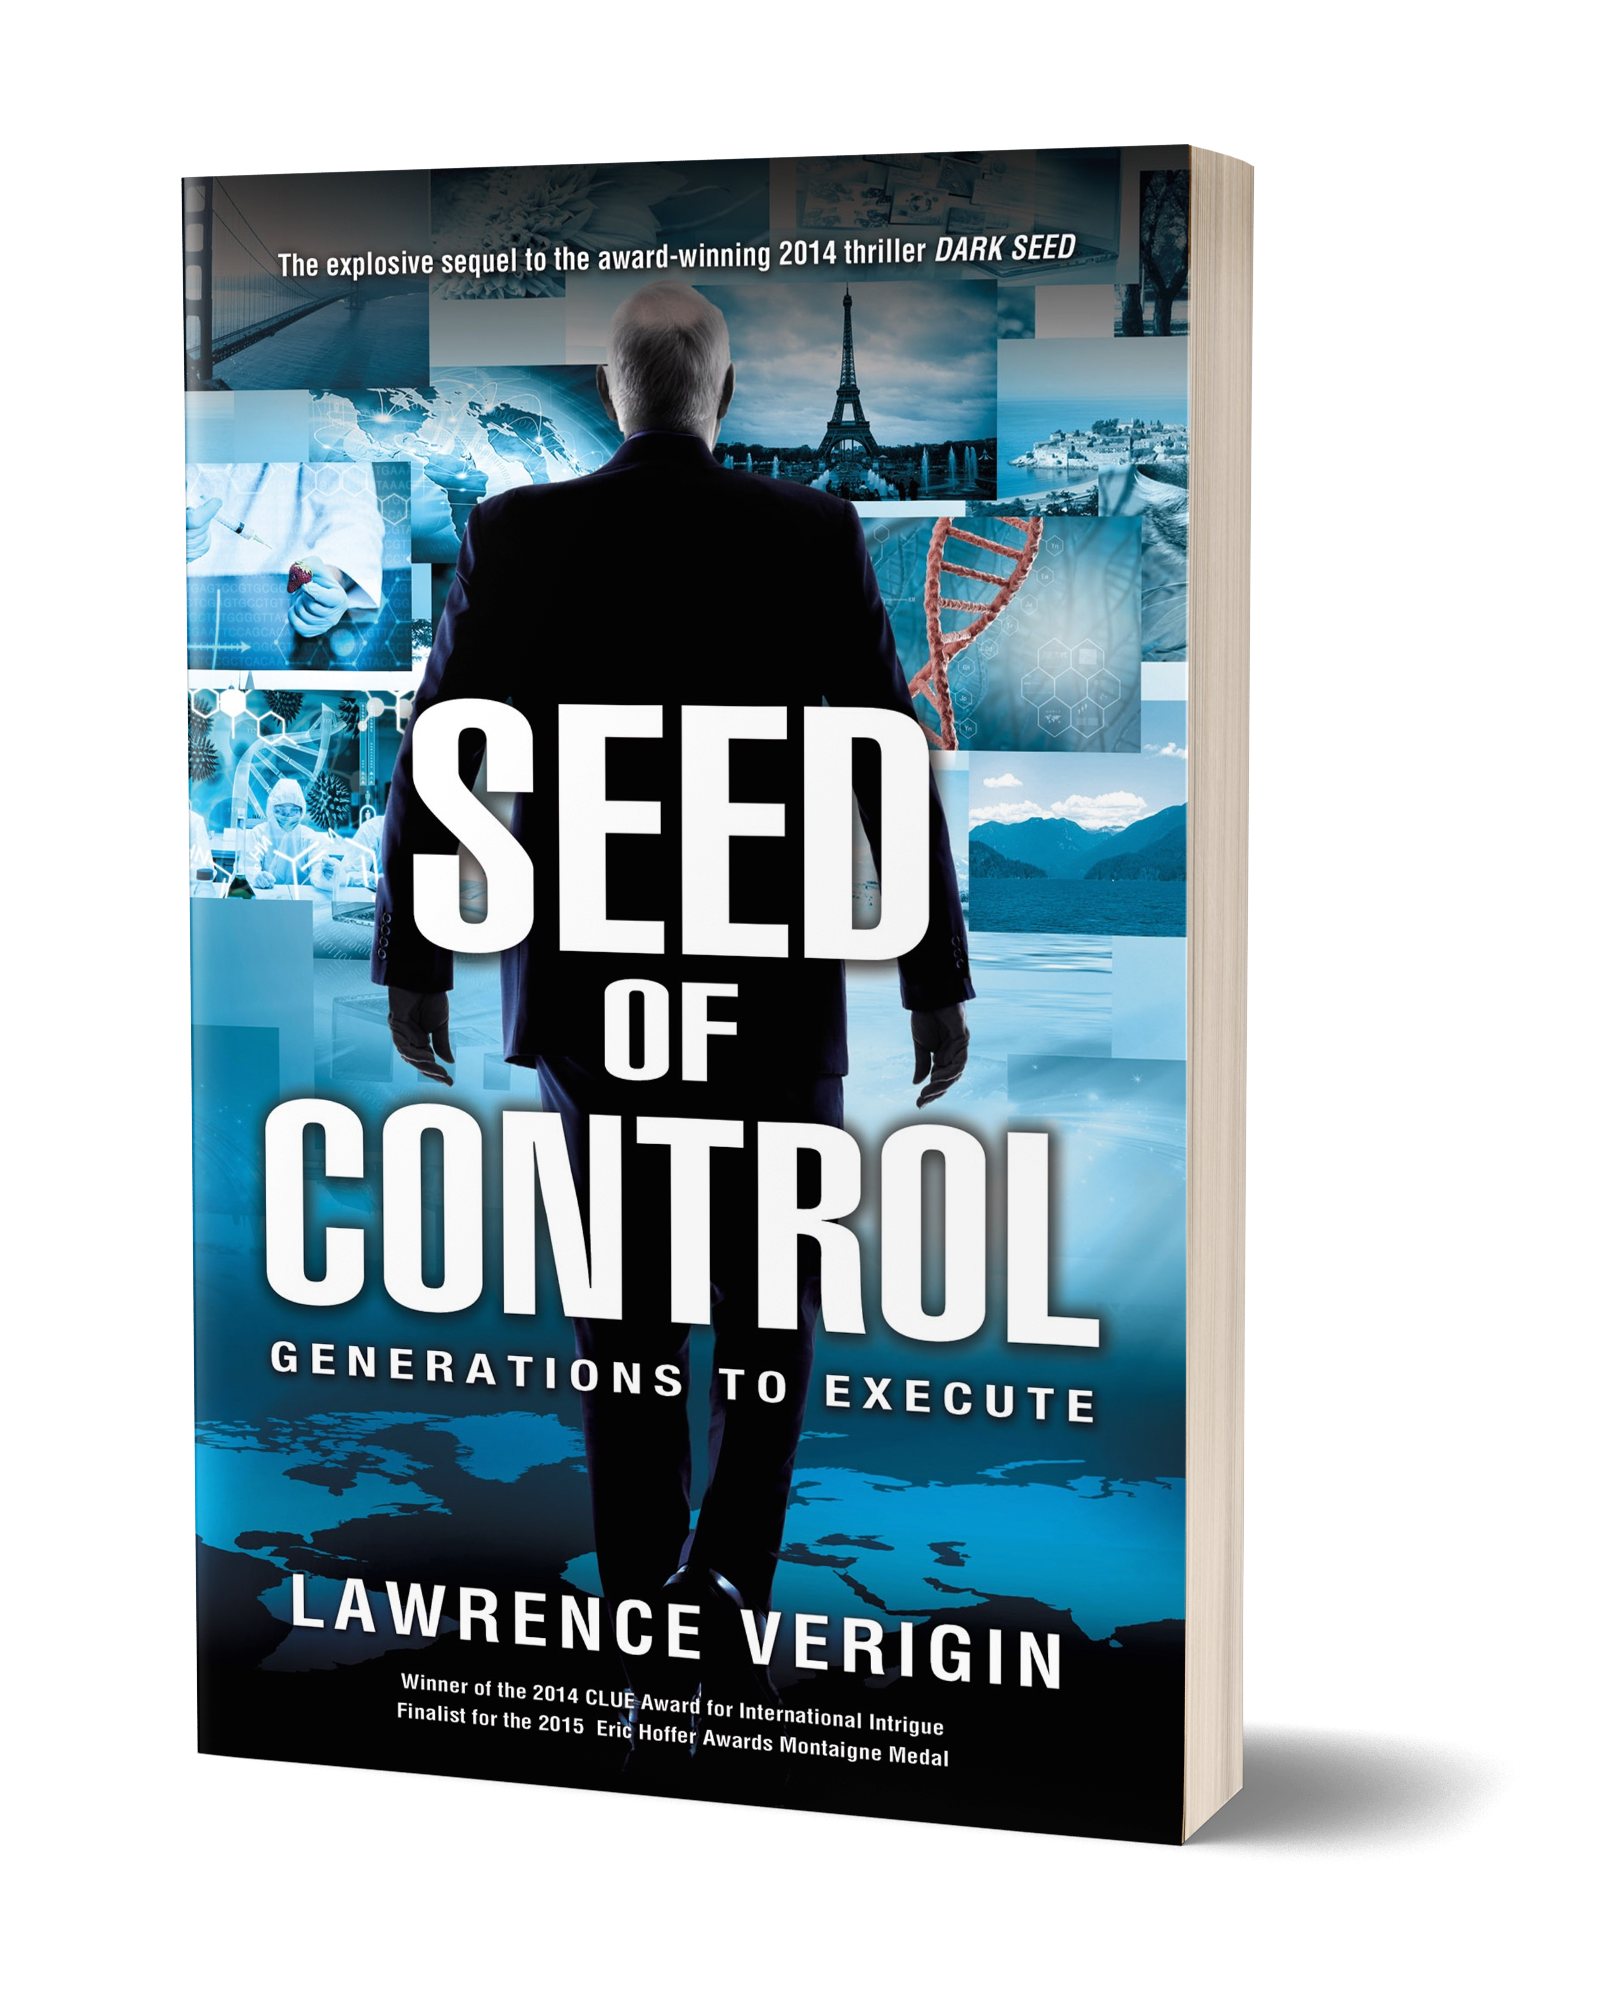 Beyond Control the book an ecological thriller by Lawrence Verigin